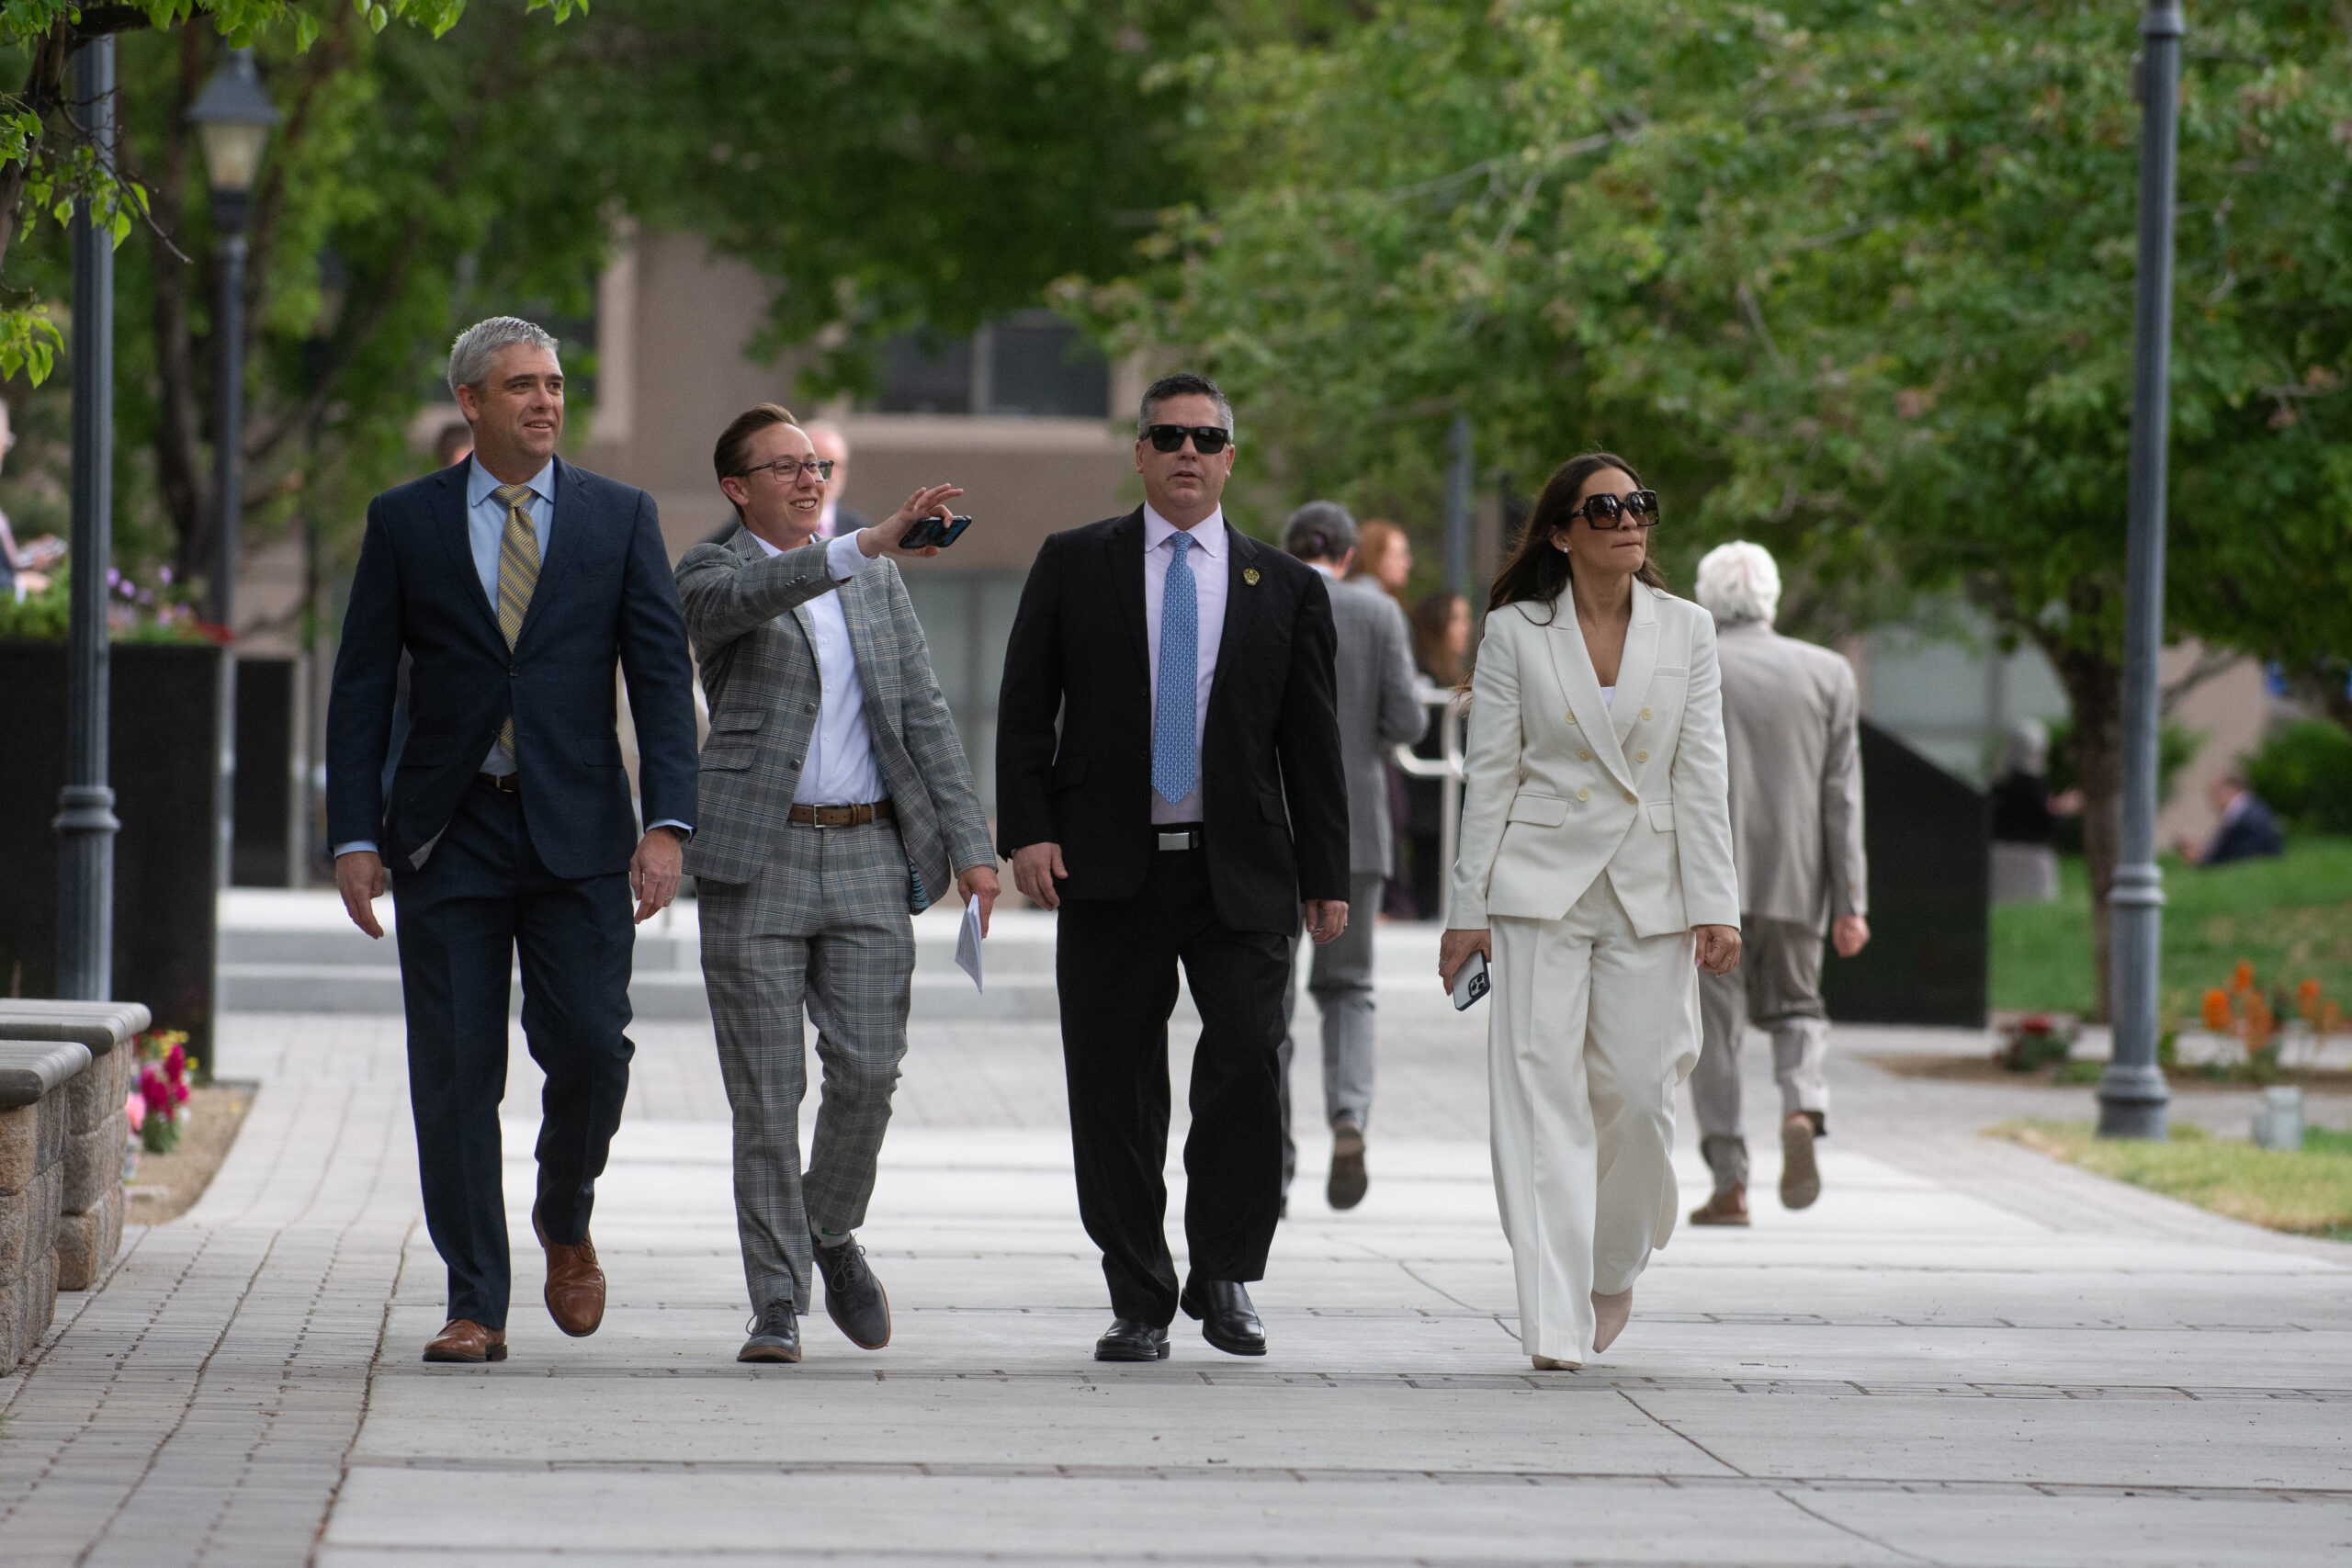 Lobbyists Joshua Hicks, left, and Lindsay Knox walk with Assembly Speaker Steve Yeager, second from right, and Assemblywoman Sandra Jauregui outside the Legislature during the final day of the 82nd legislative session in Carson City on June 5, 2023. (David Calvert/The Nevada Independent).